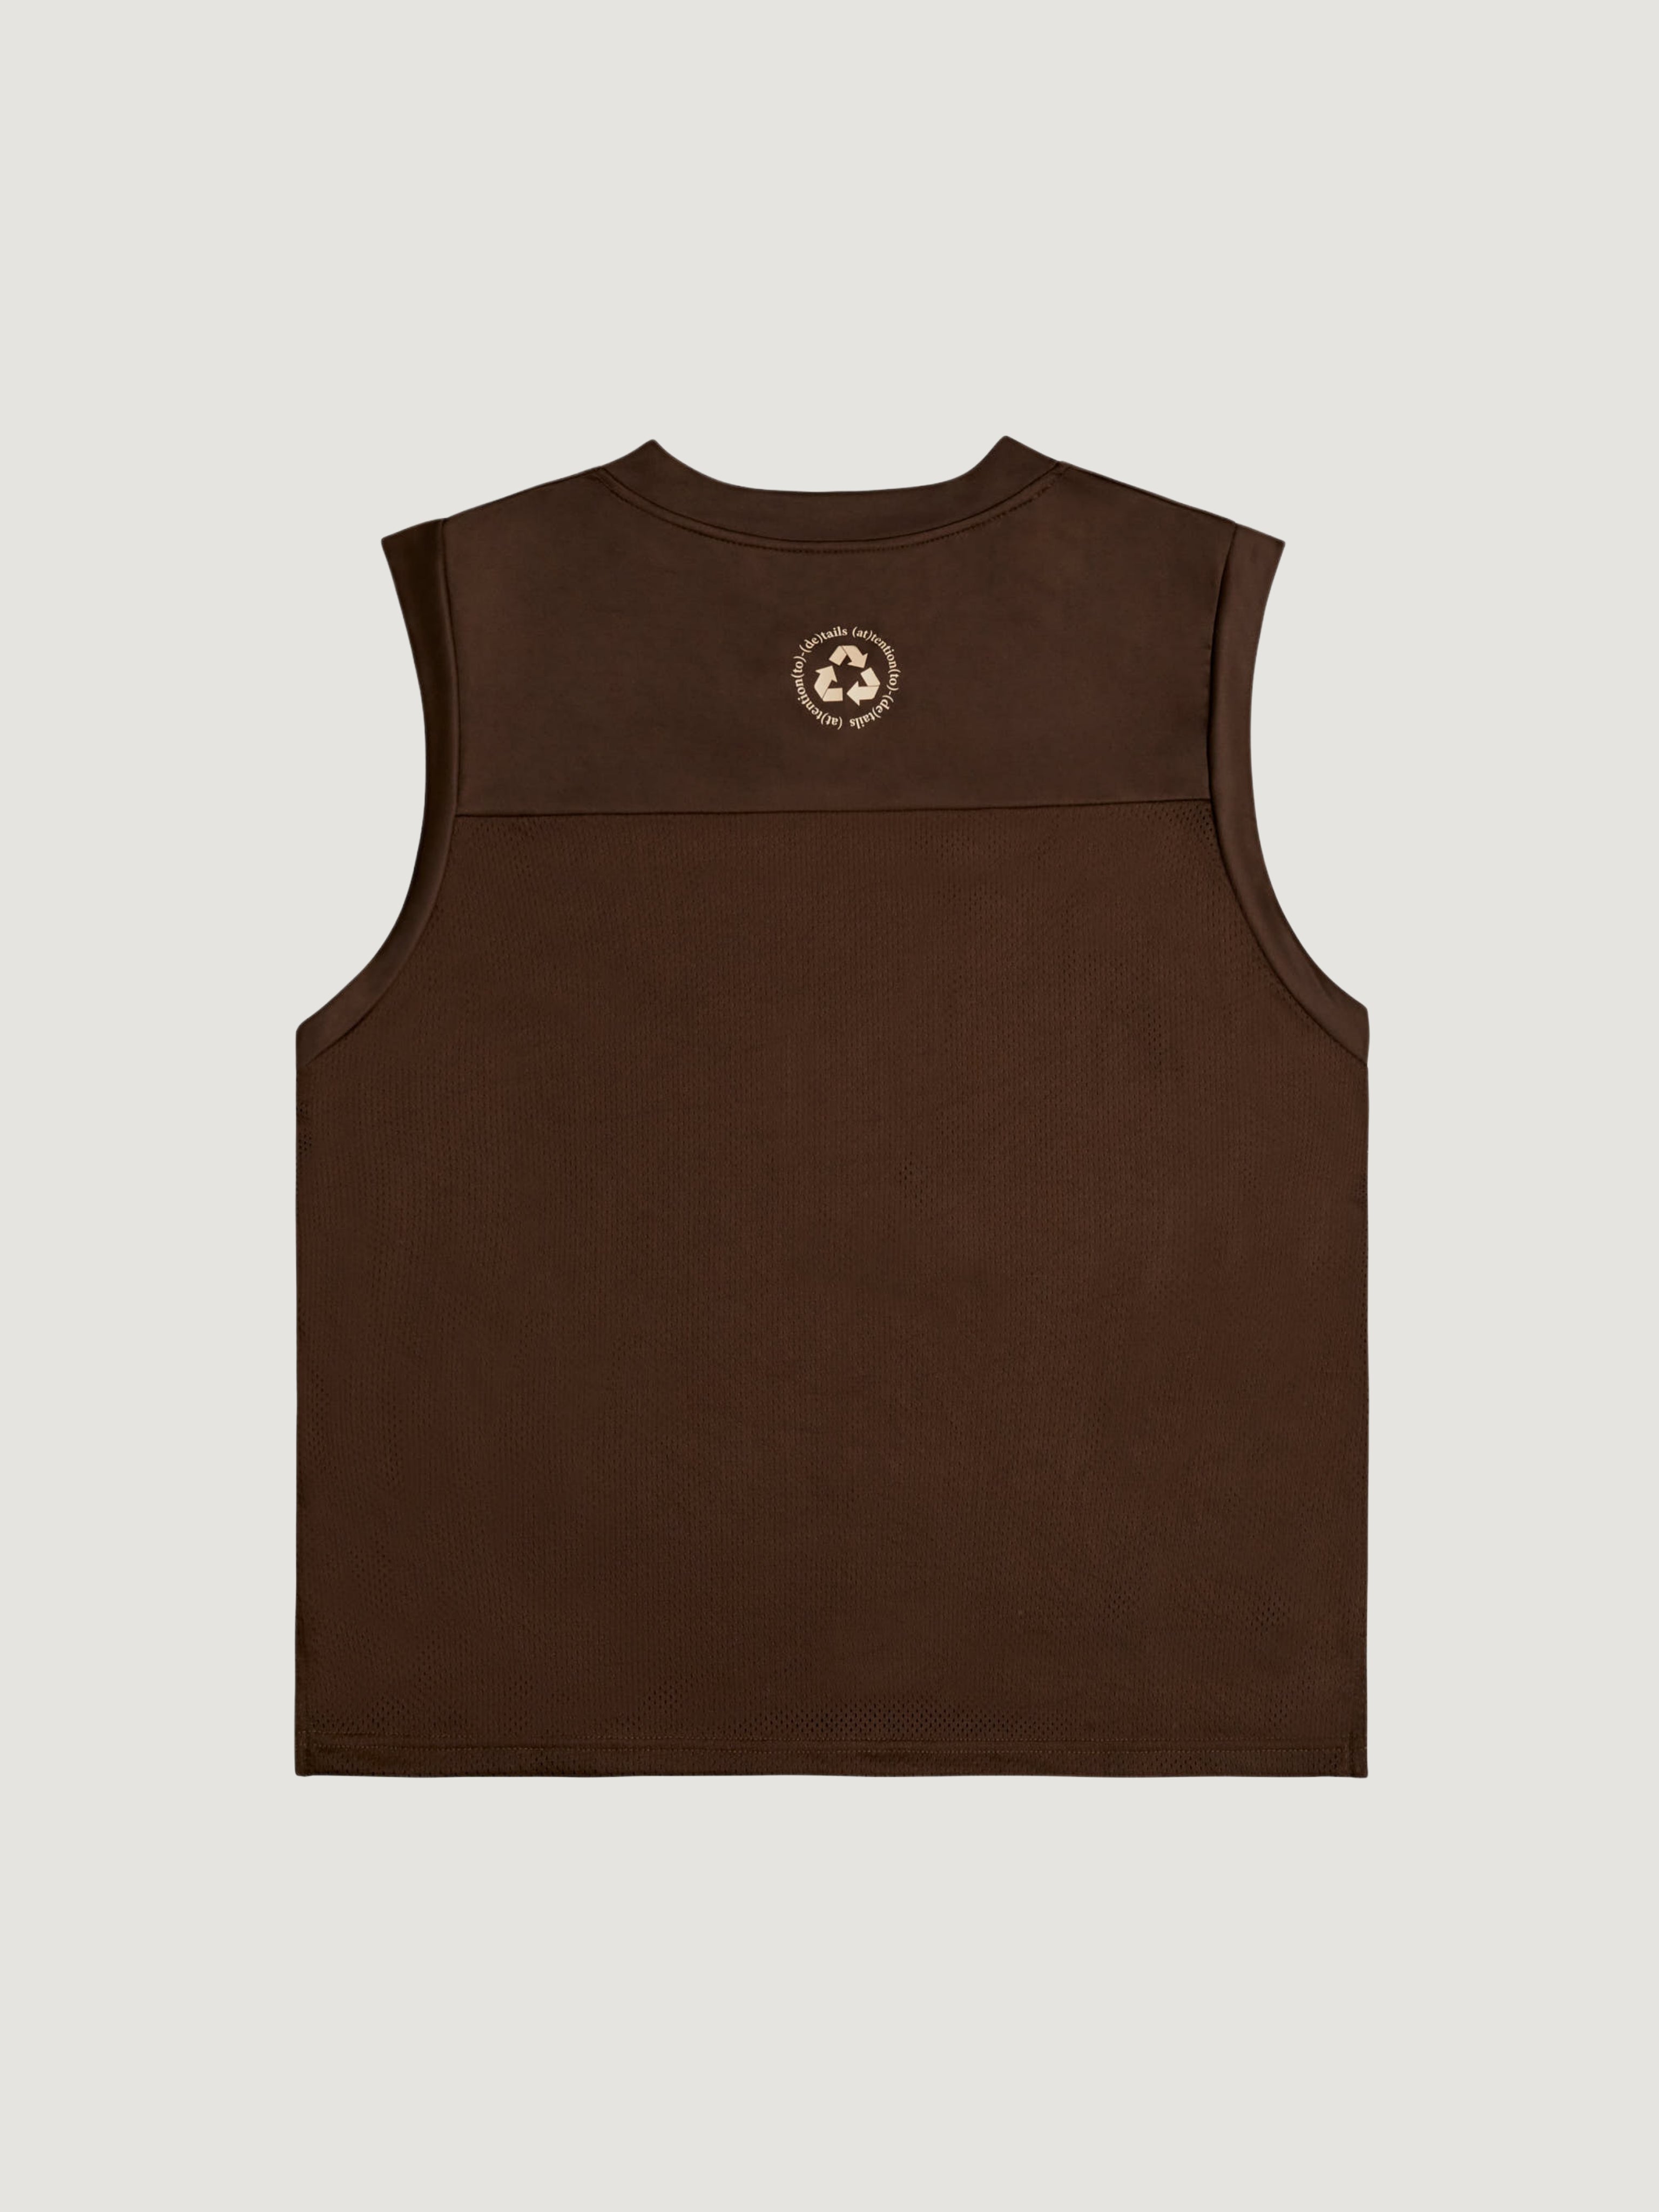 CASUAL SPORTS TANK TOP BROWN - ATTODE